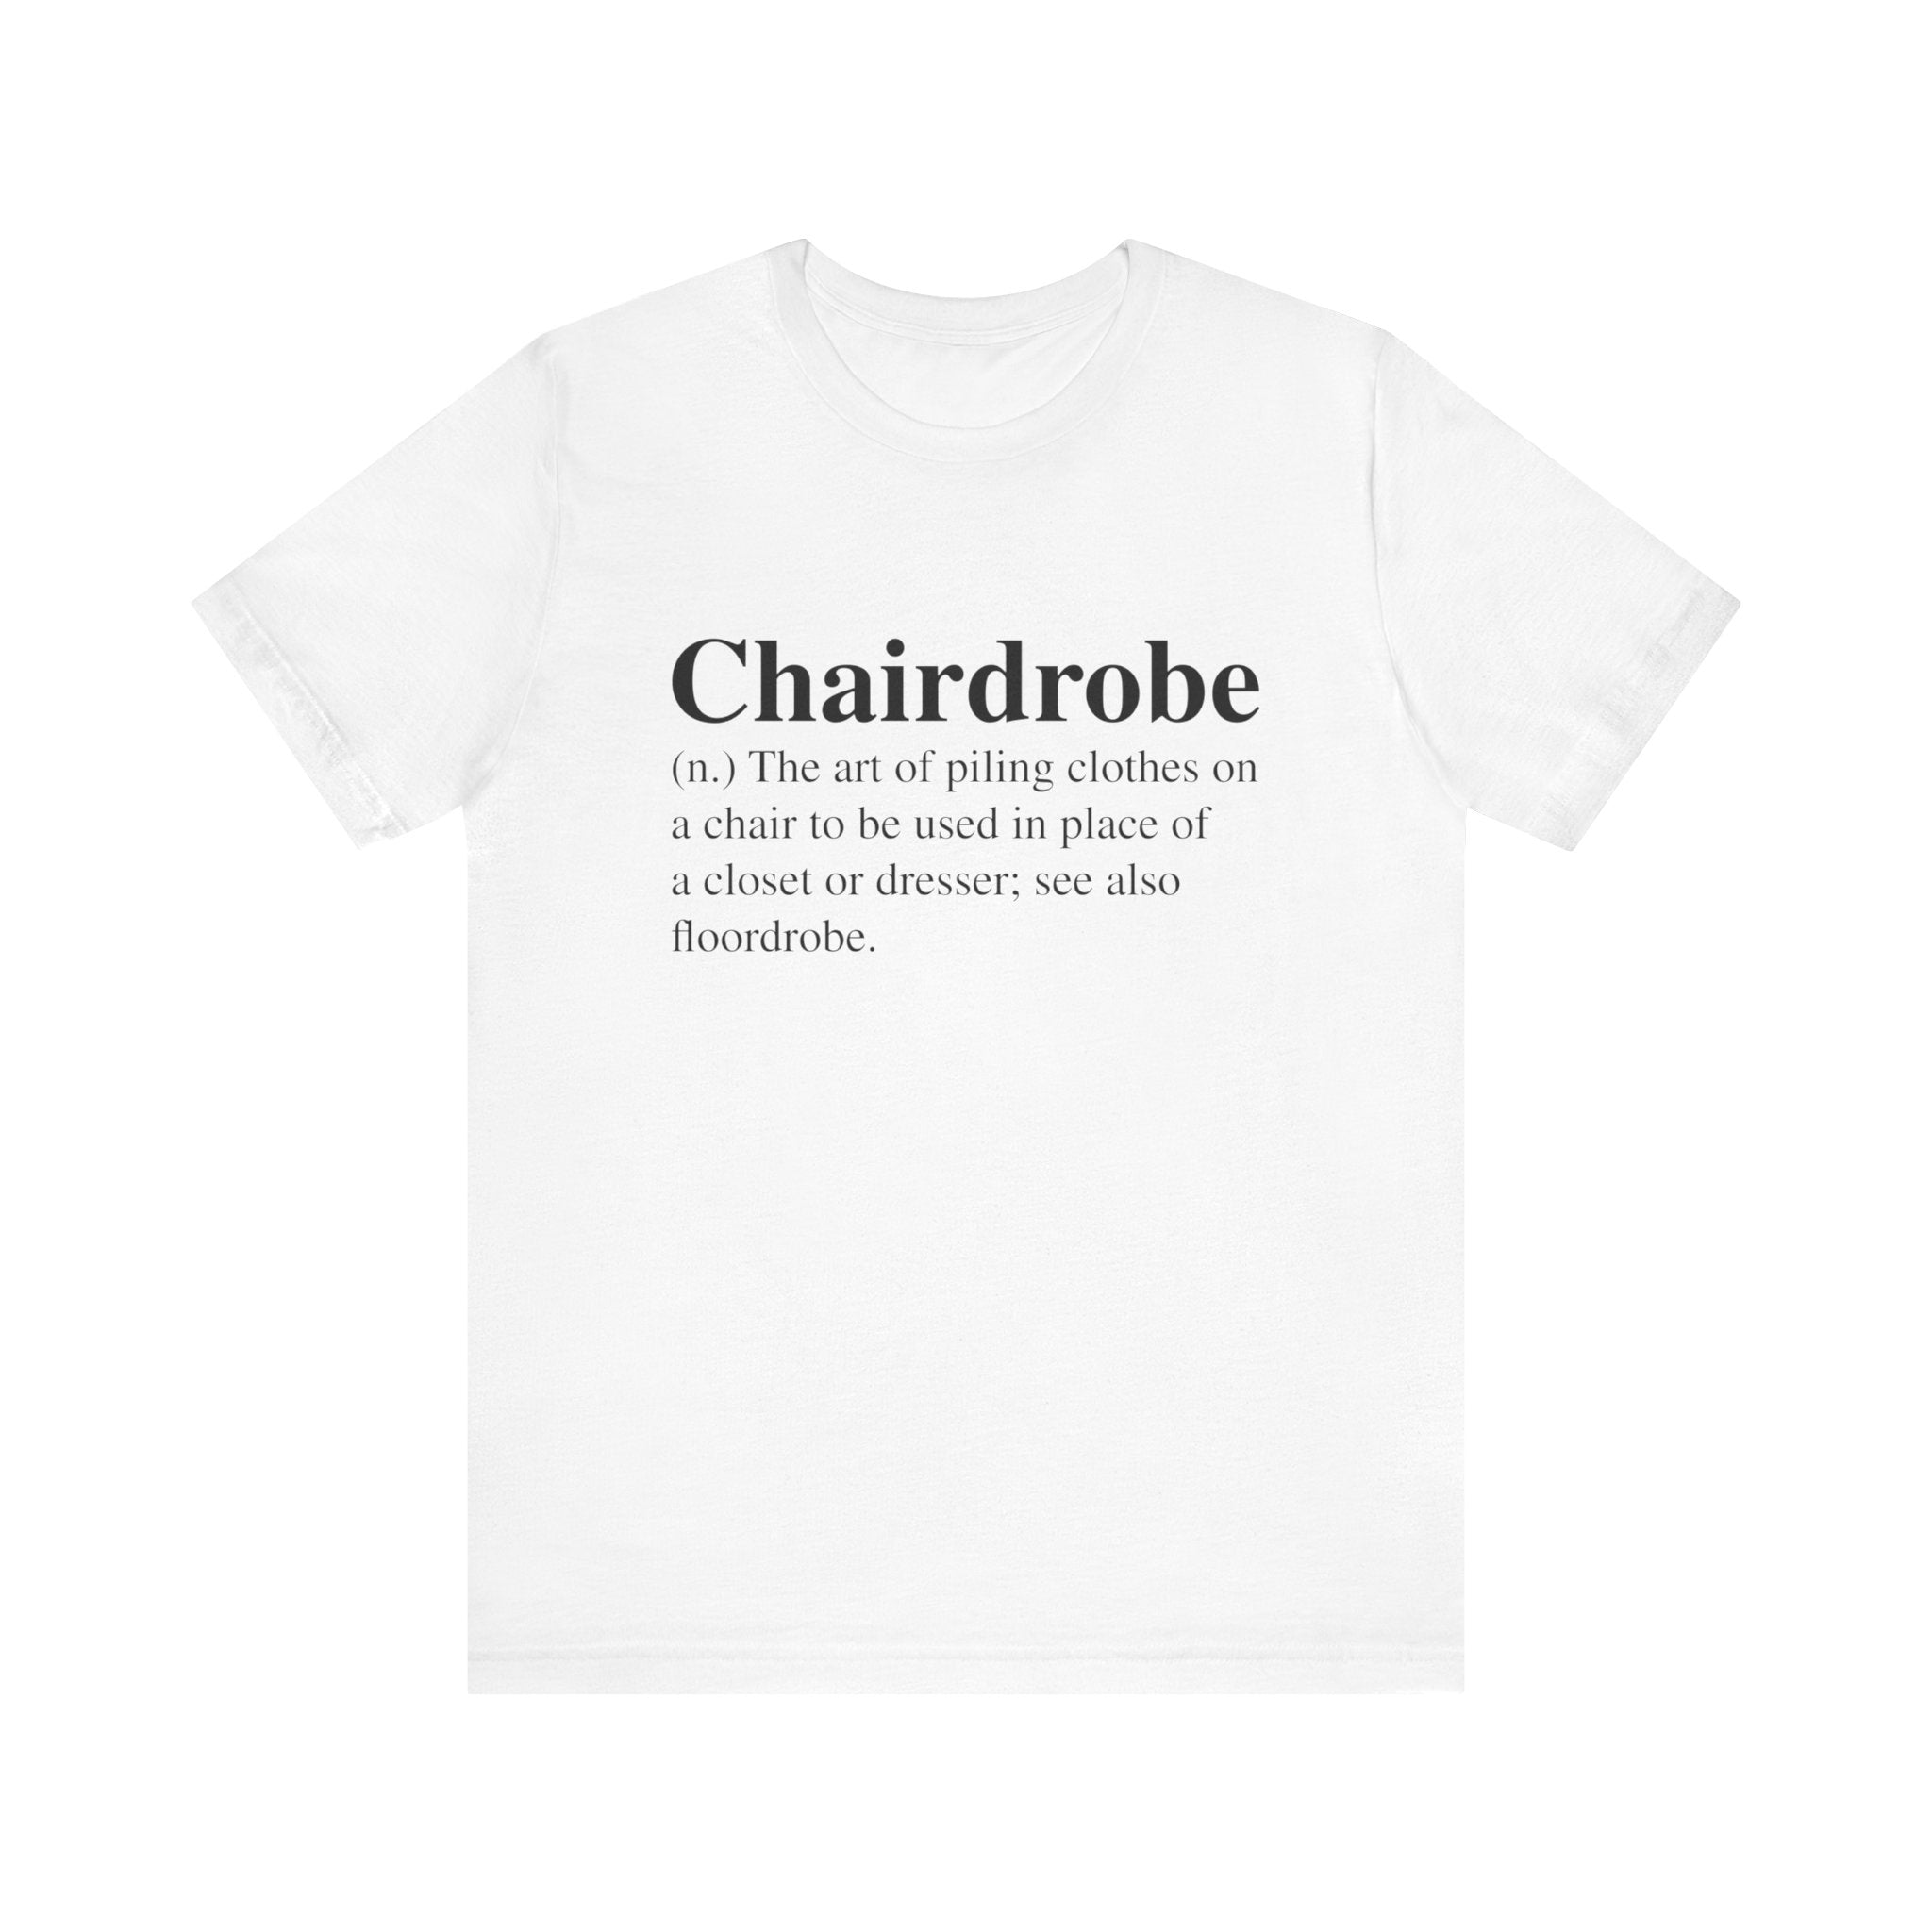 Chairdrobe T-shirt with text definition of "chairdrobe" humorously explaining it as a method of piling clothes on a chair, used as an alternative to a closet.